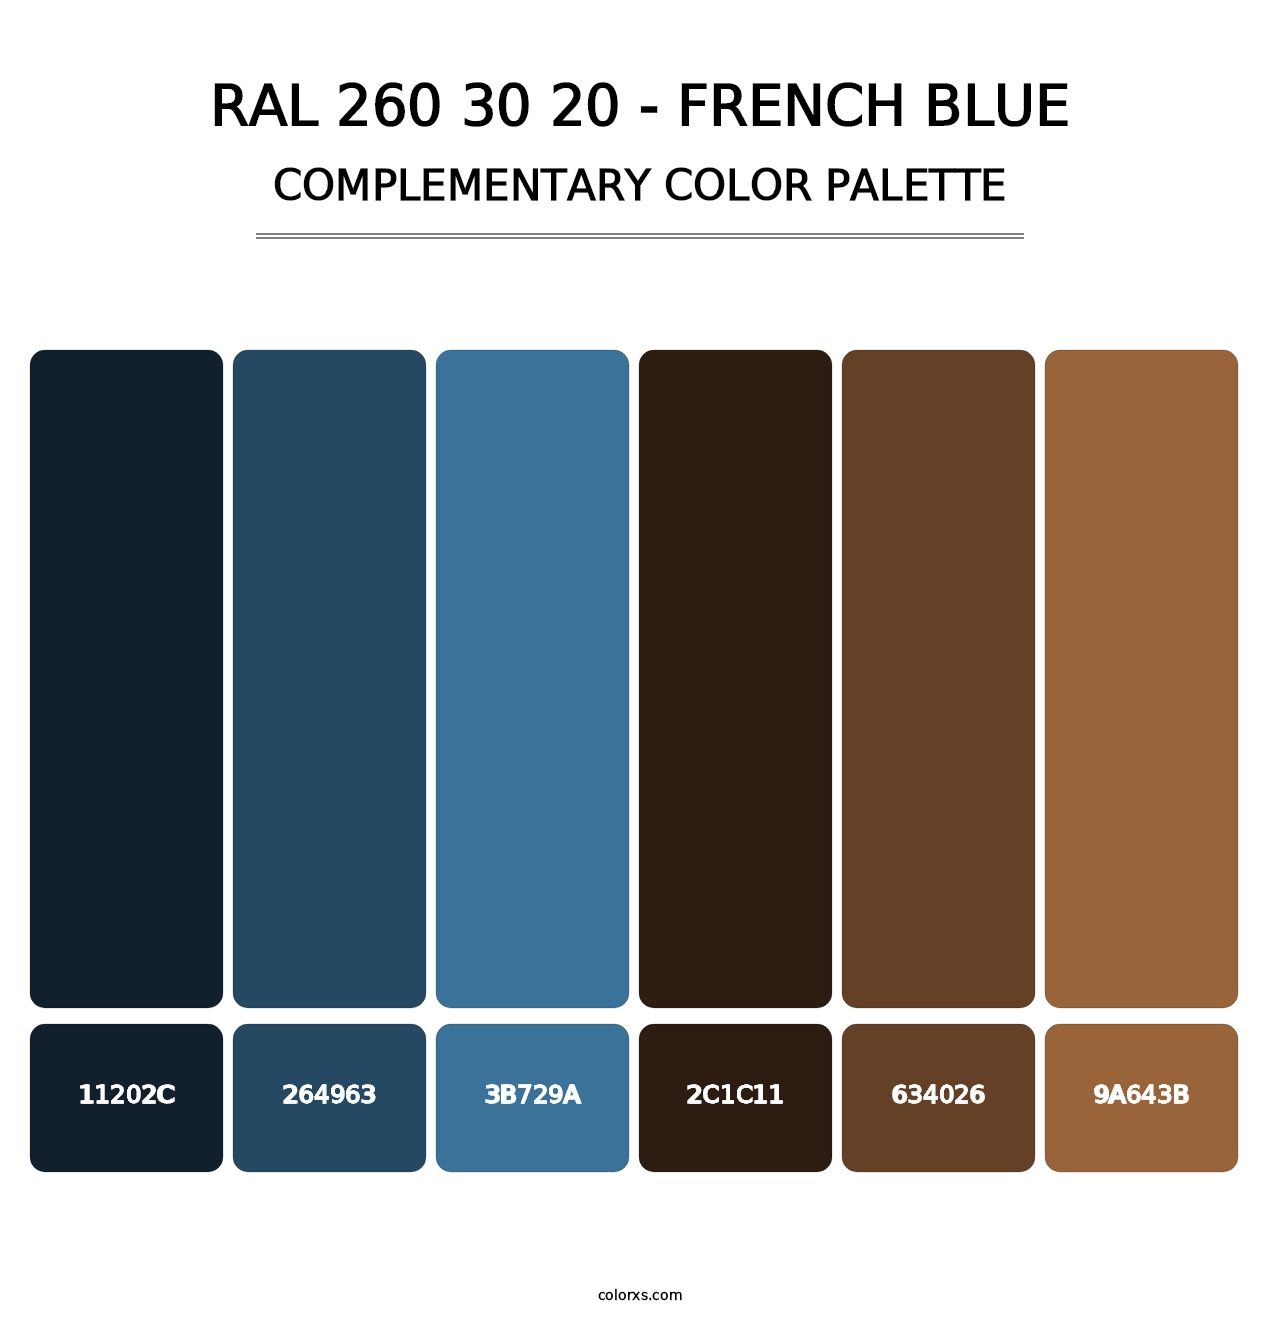 RAL 260 30 20 - French Blue - Complementary Color Palette